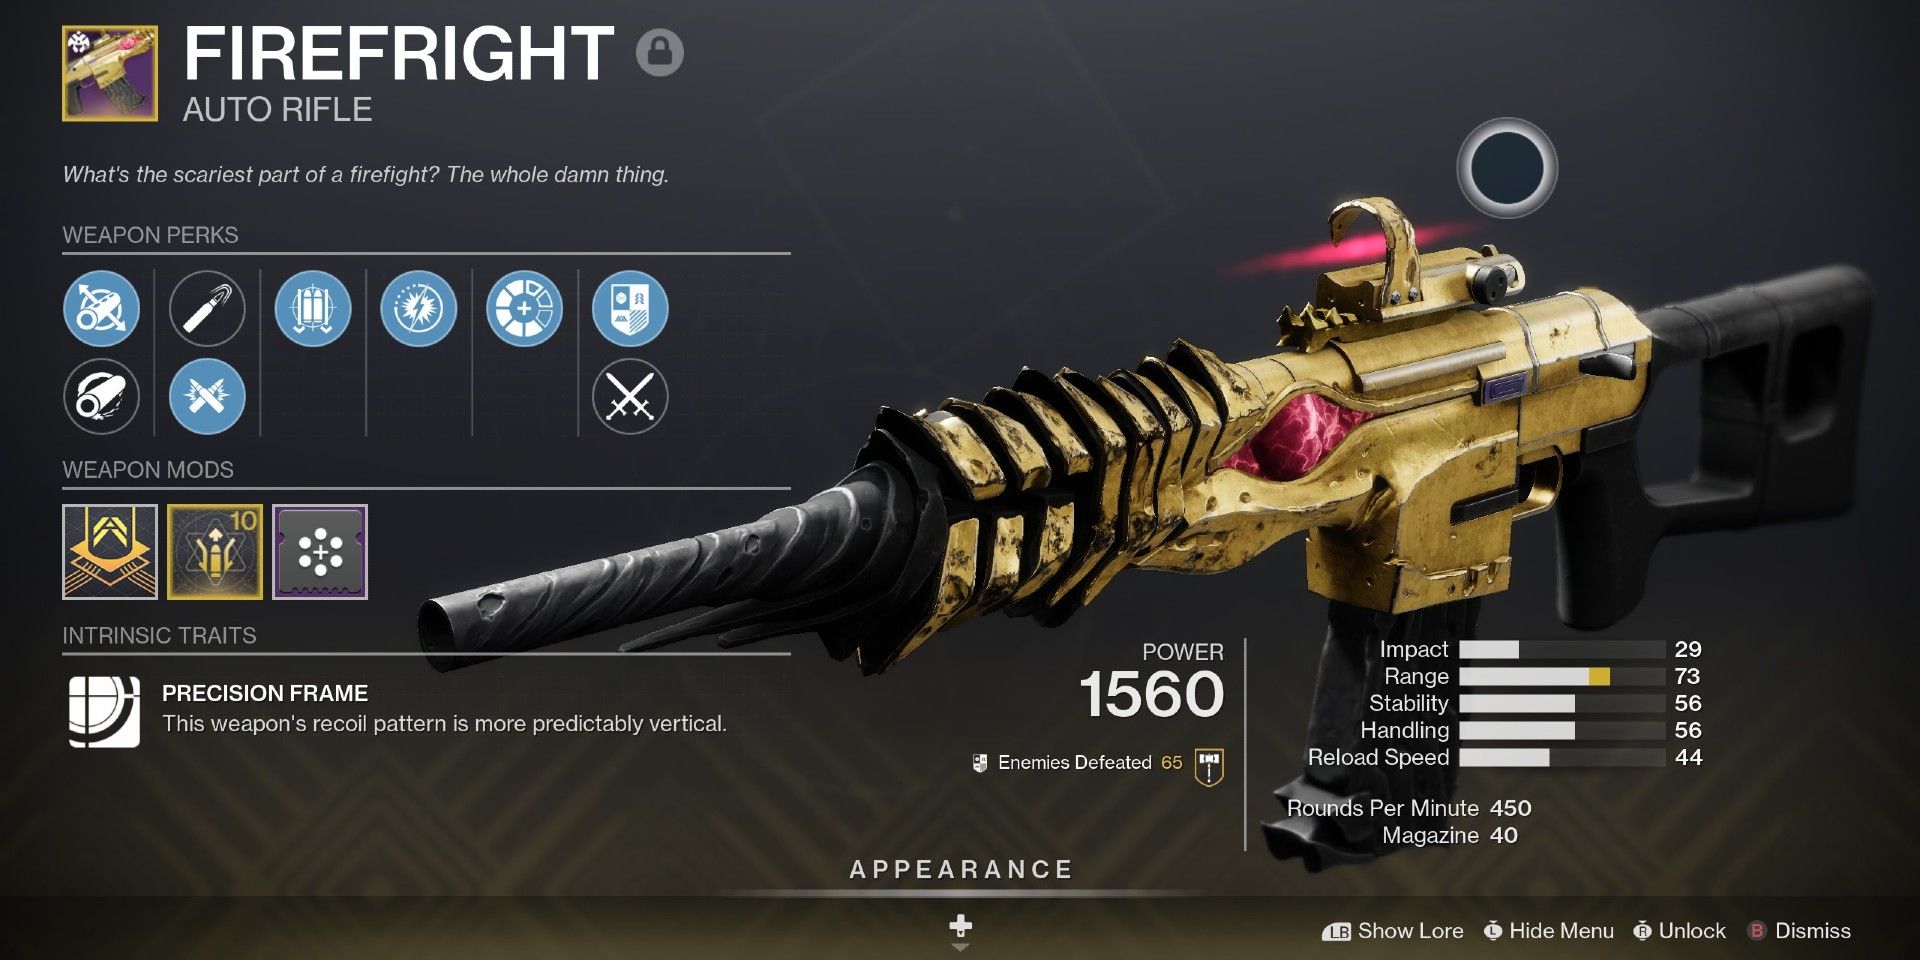 Destiny 2: How To Get The Firefright Auto Rifle (& God Rolls)